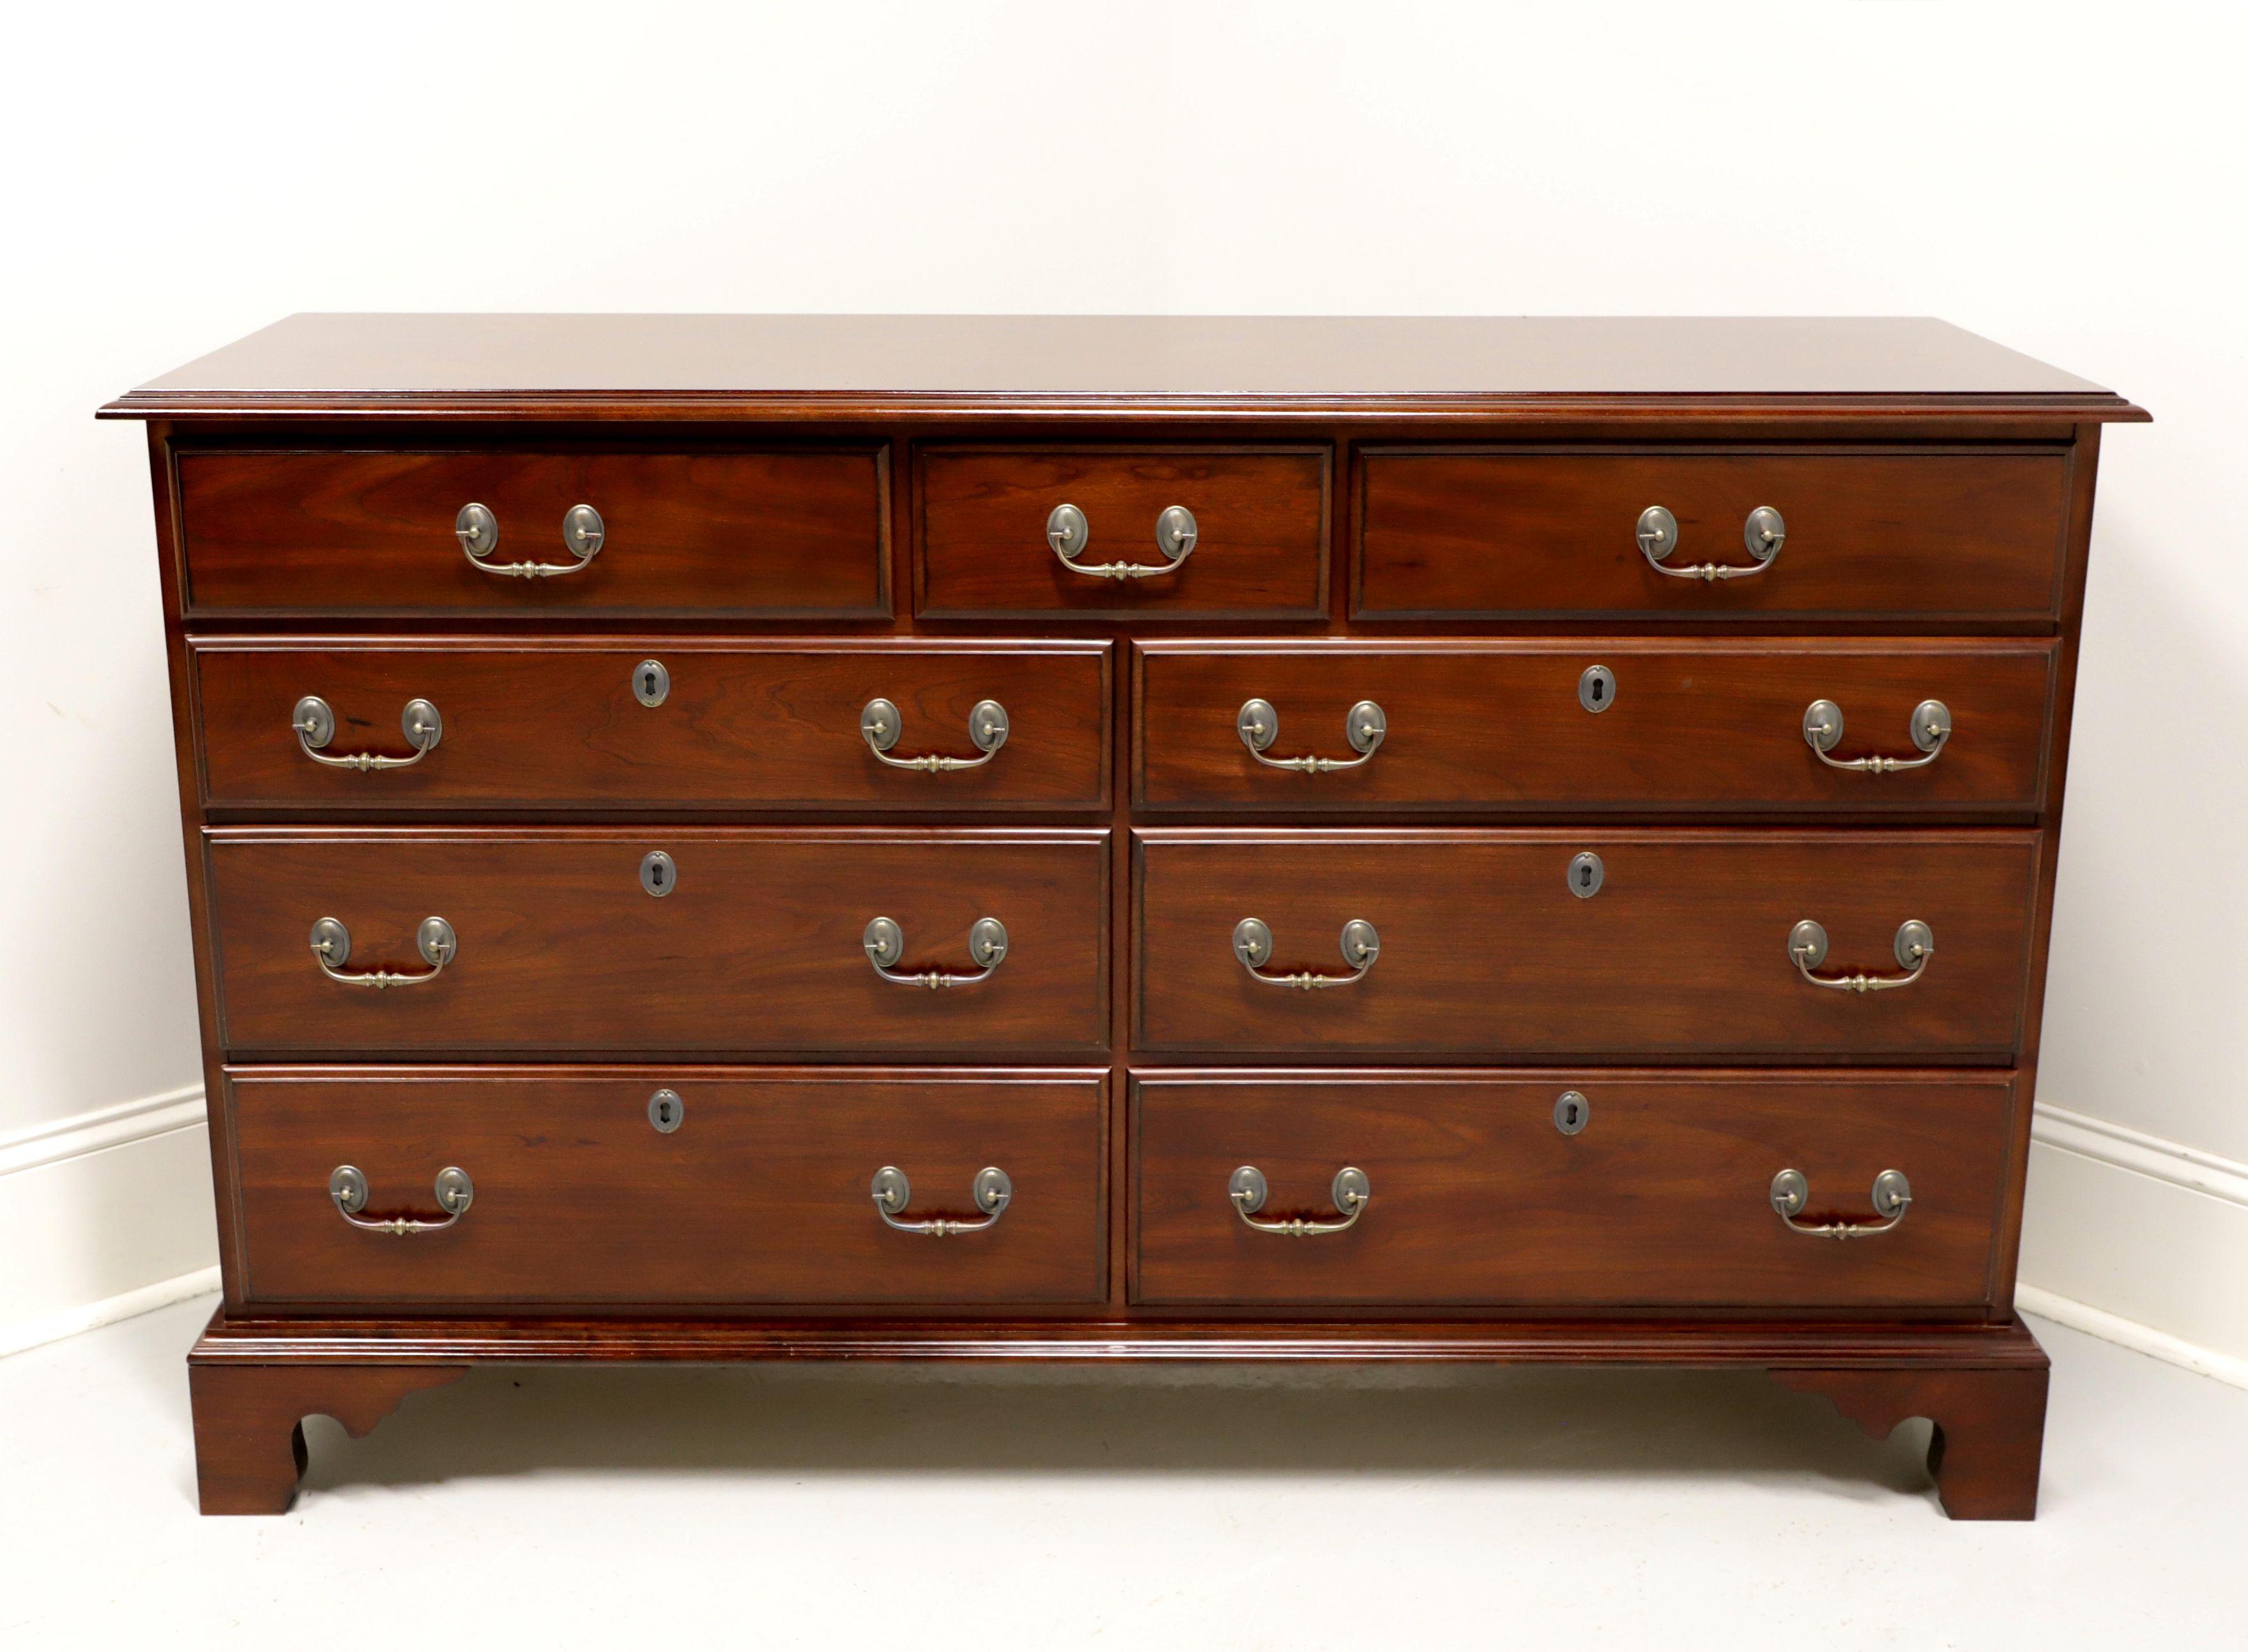 A Chippendale style dresser by Harden Furniture, their 